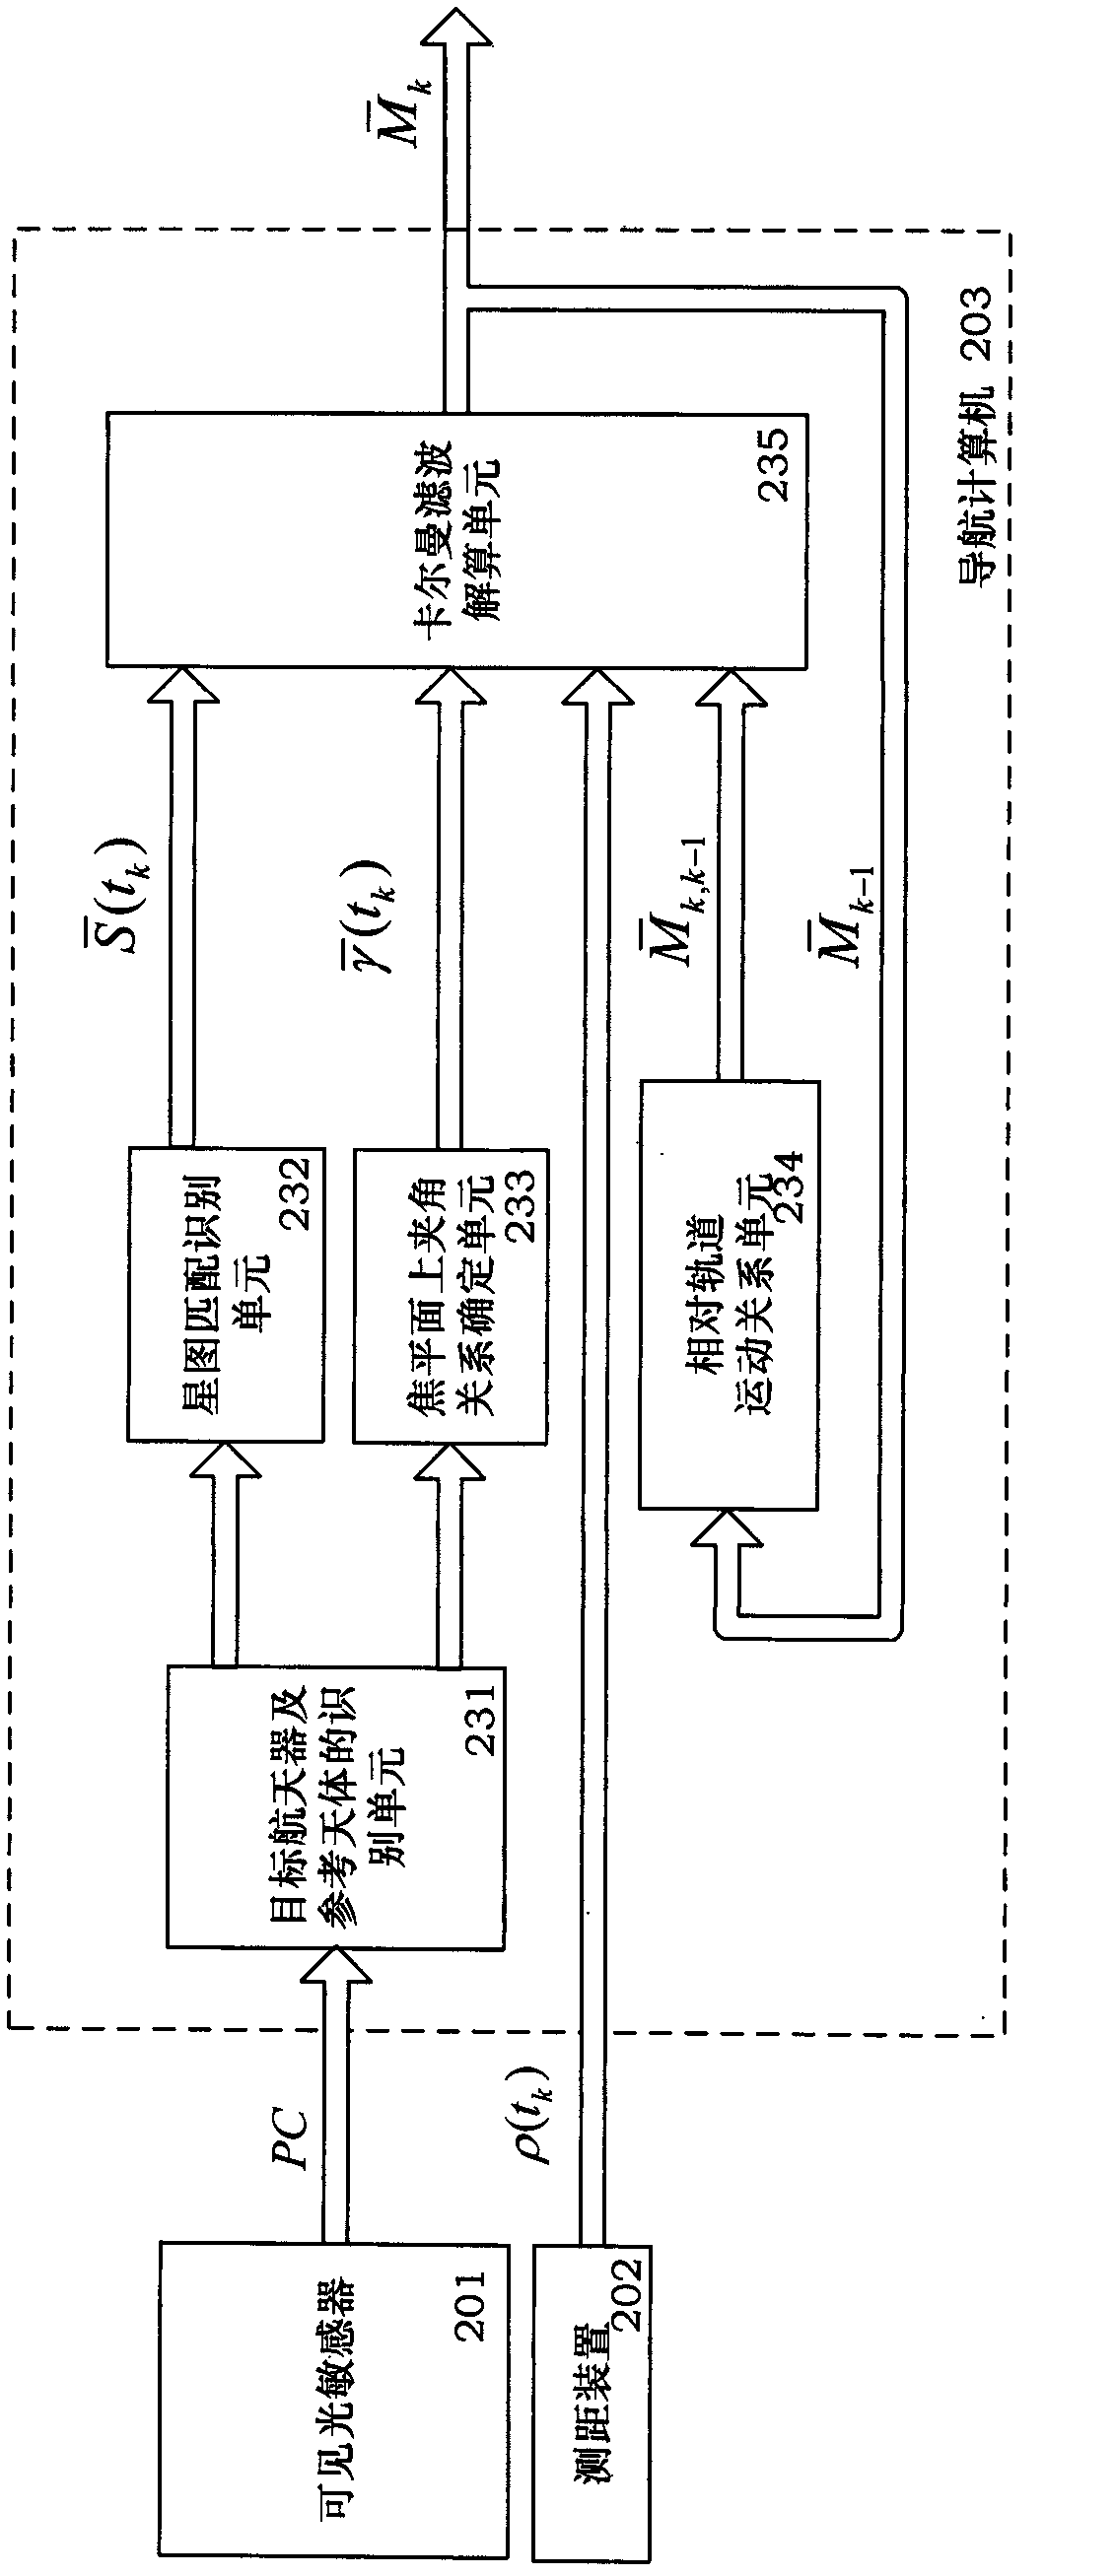 System for performing relative navigation on spacecraft based on background astronomical information